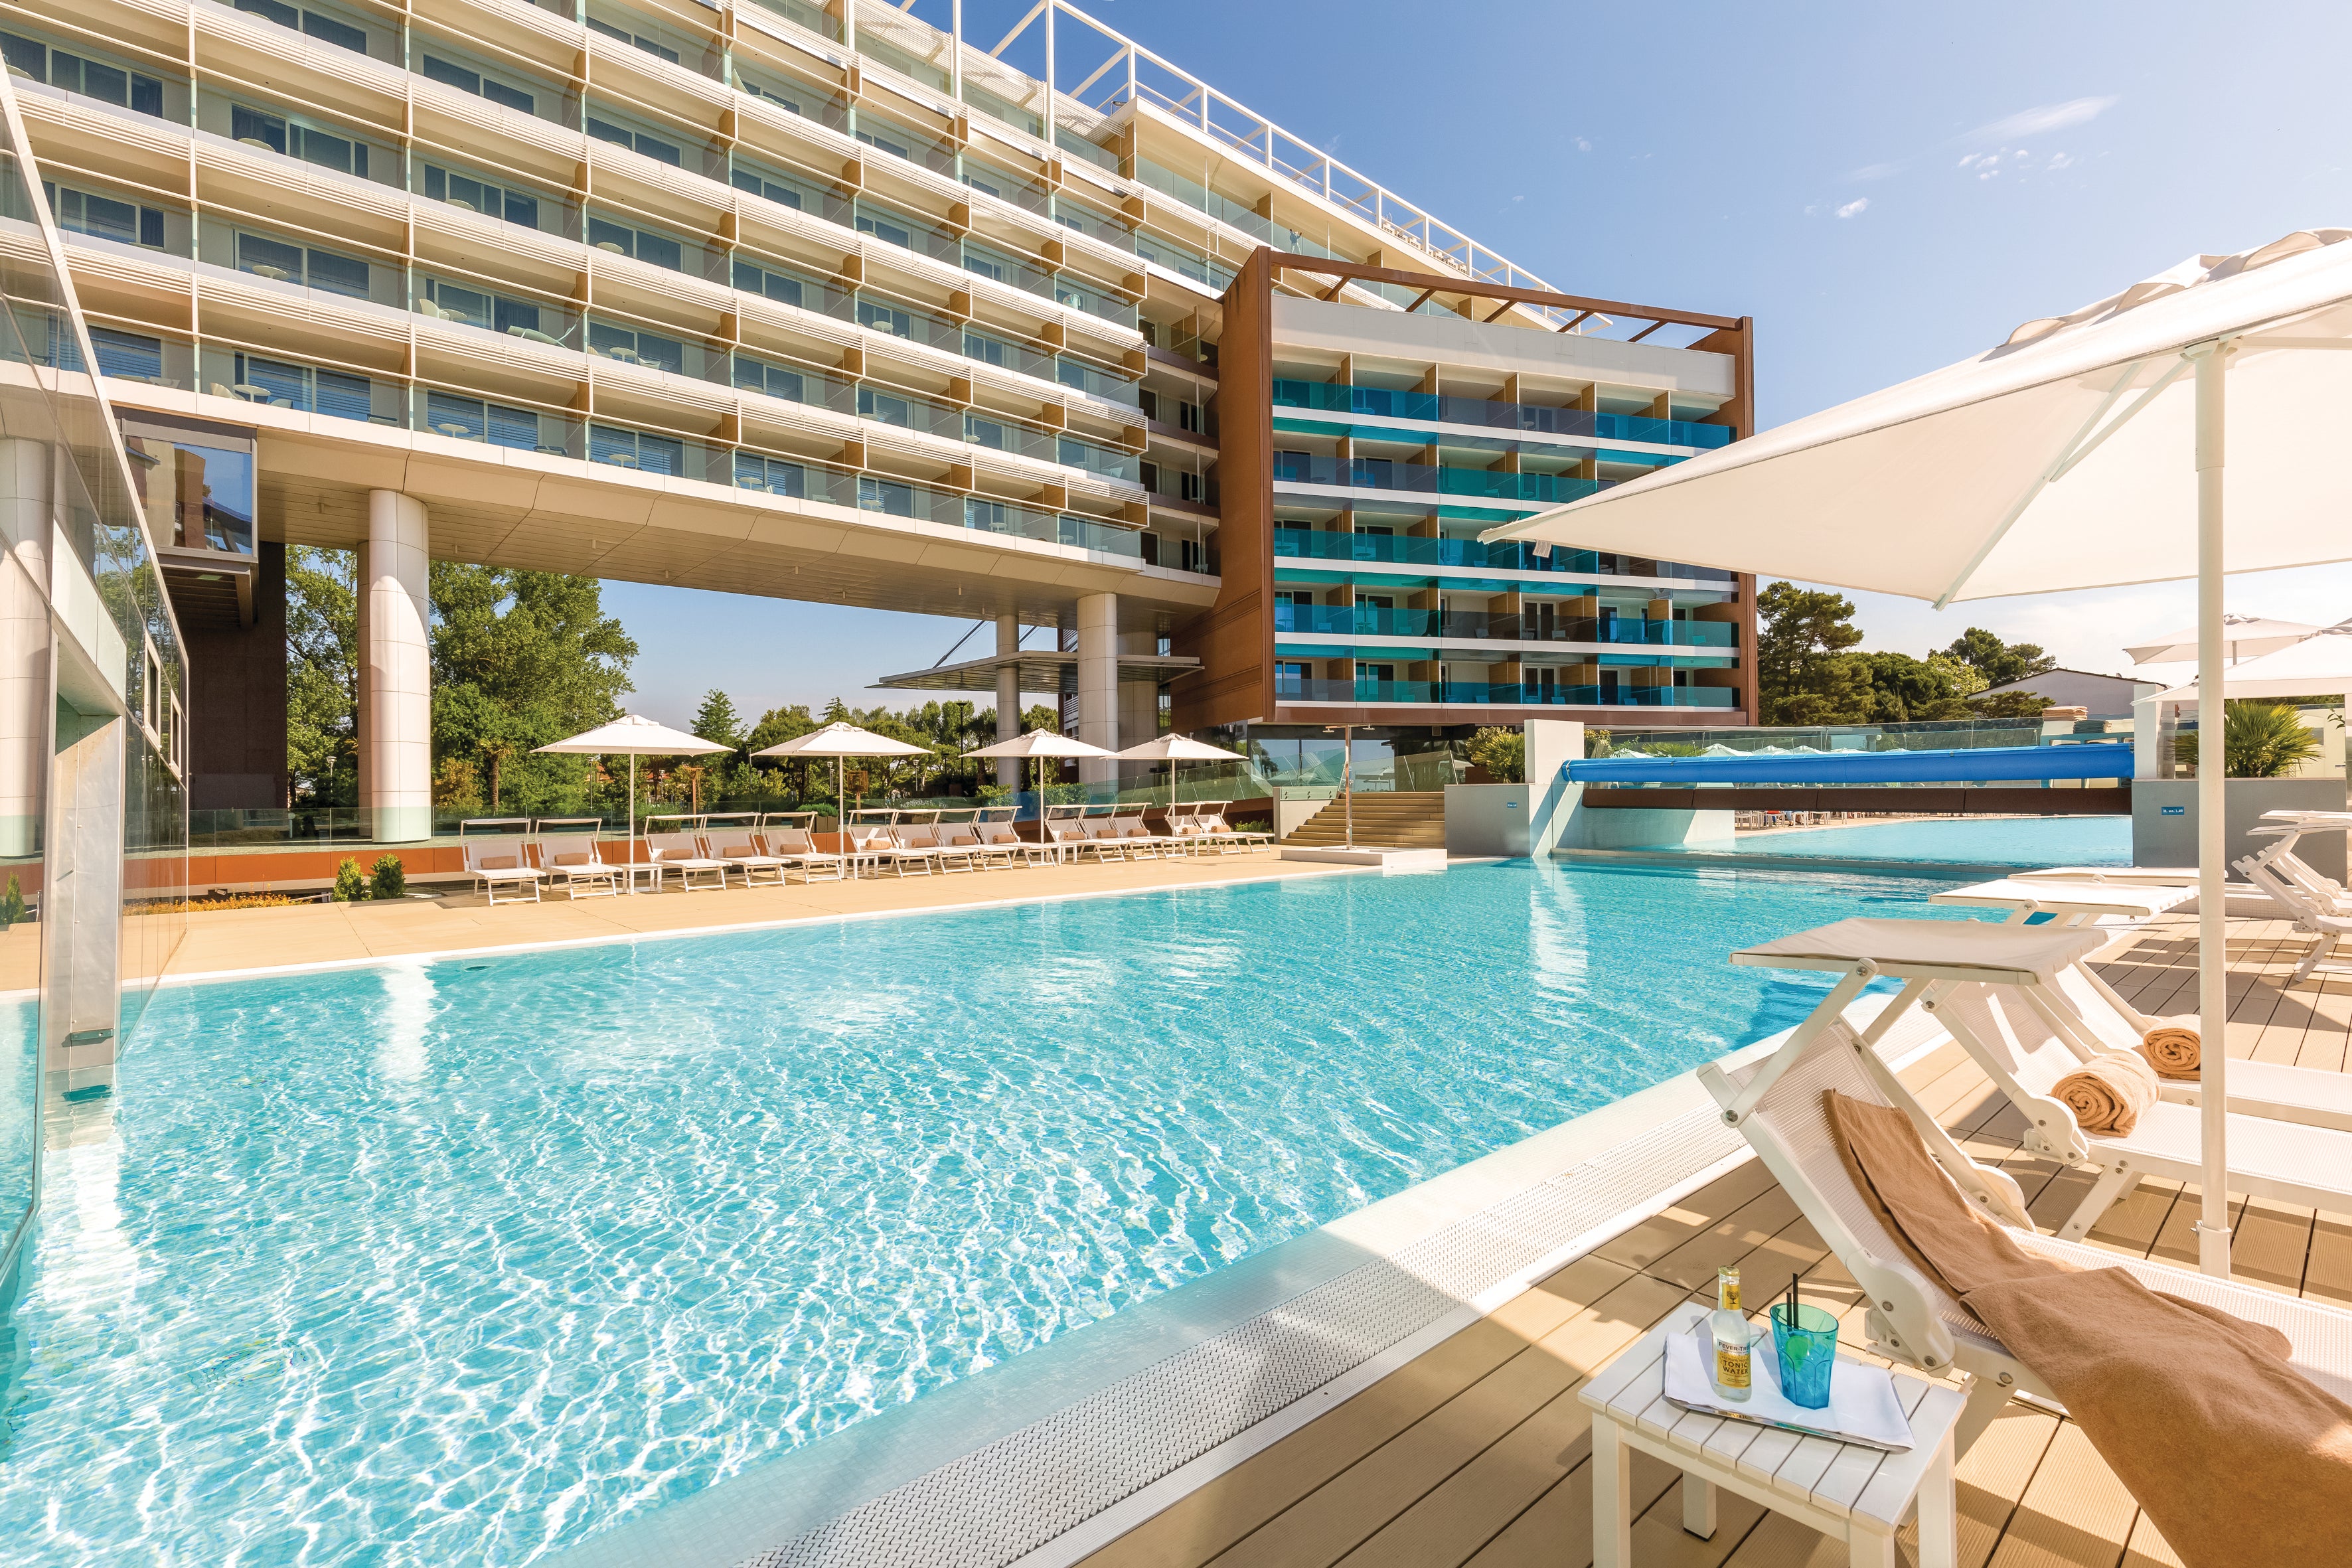 Enjoy days by the pool or on the private beach at Almar Jesolo Resort and Spa